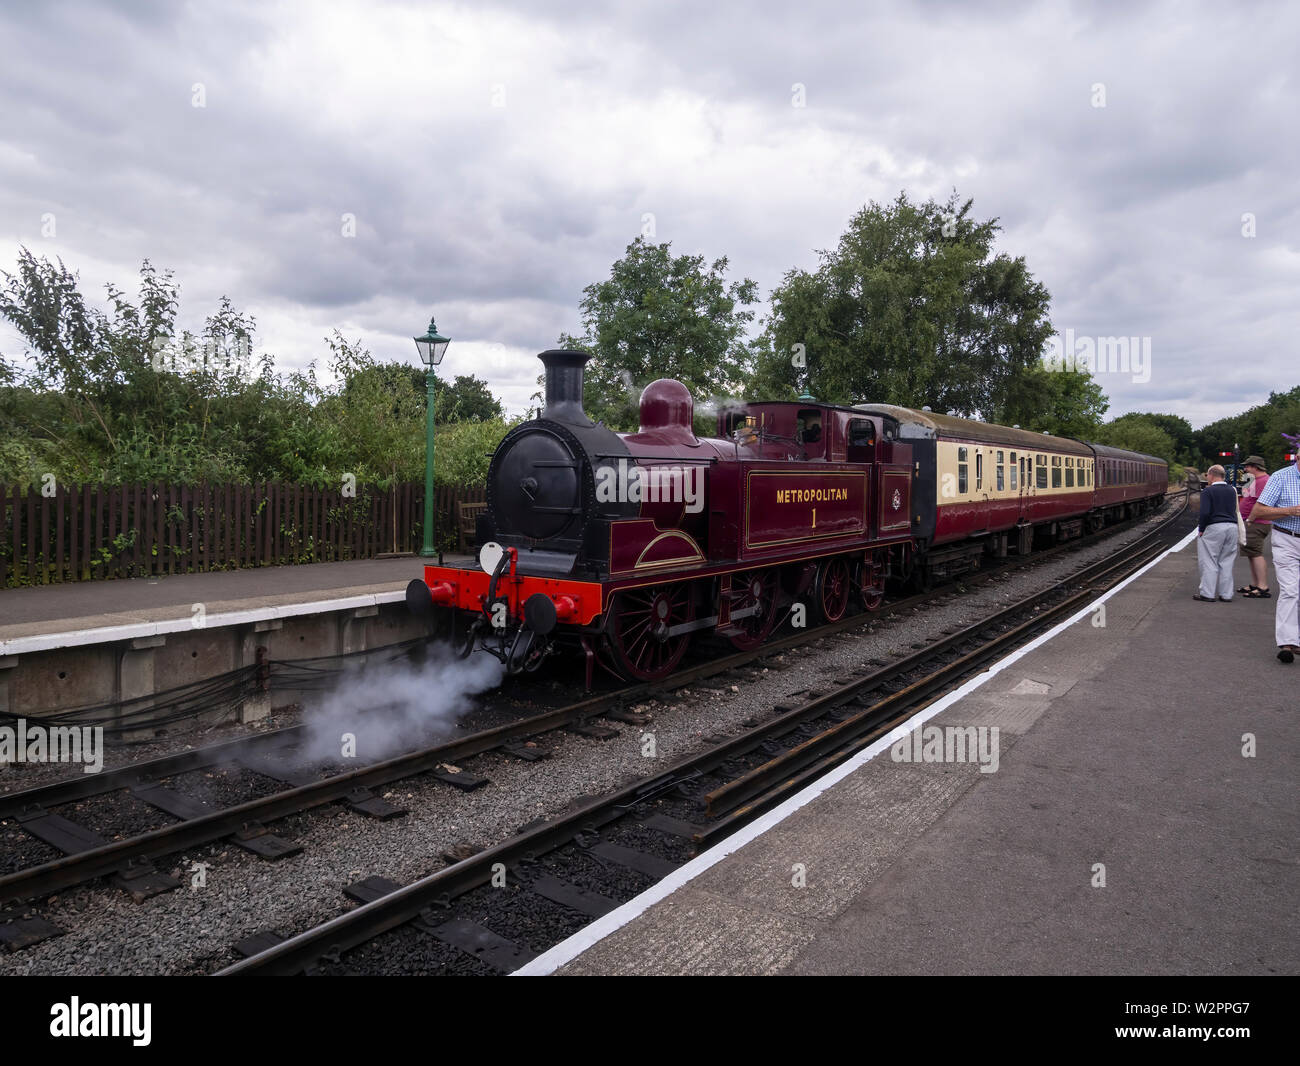 Metrpolitan railway no 1 class E 0-4-2 tank locomotive  at North Weald station on the Epping and Ongar railway Stock Photo